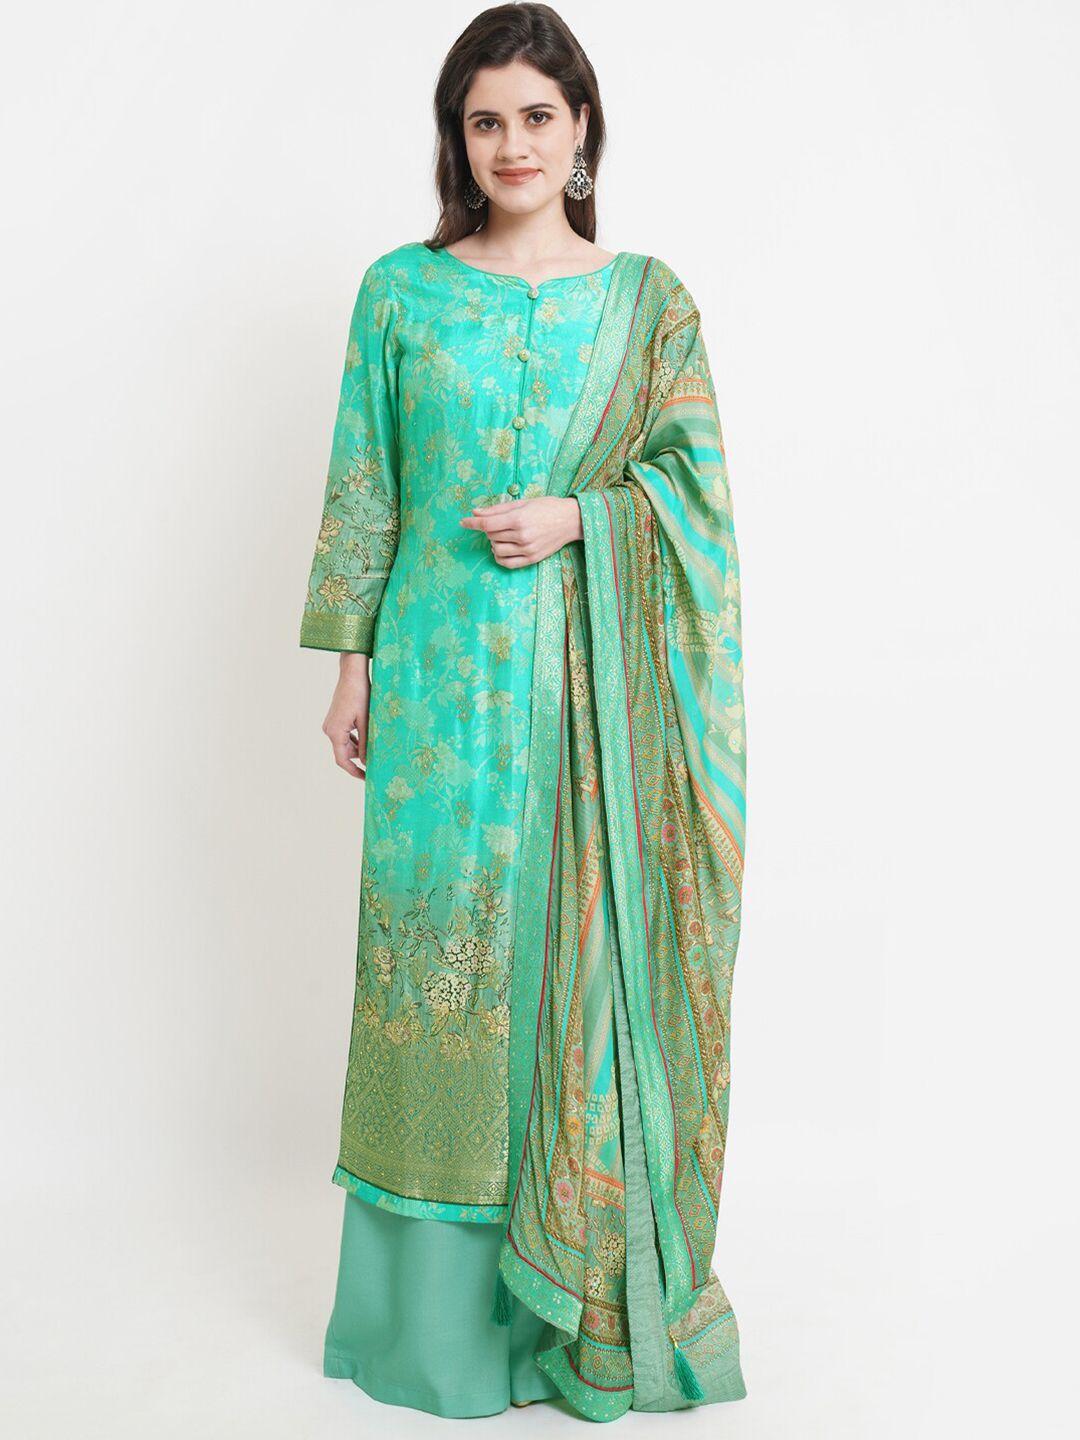 stylee lifestyle green & gold-toned digital printed unstitched dress material